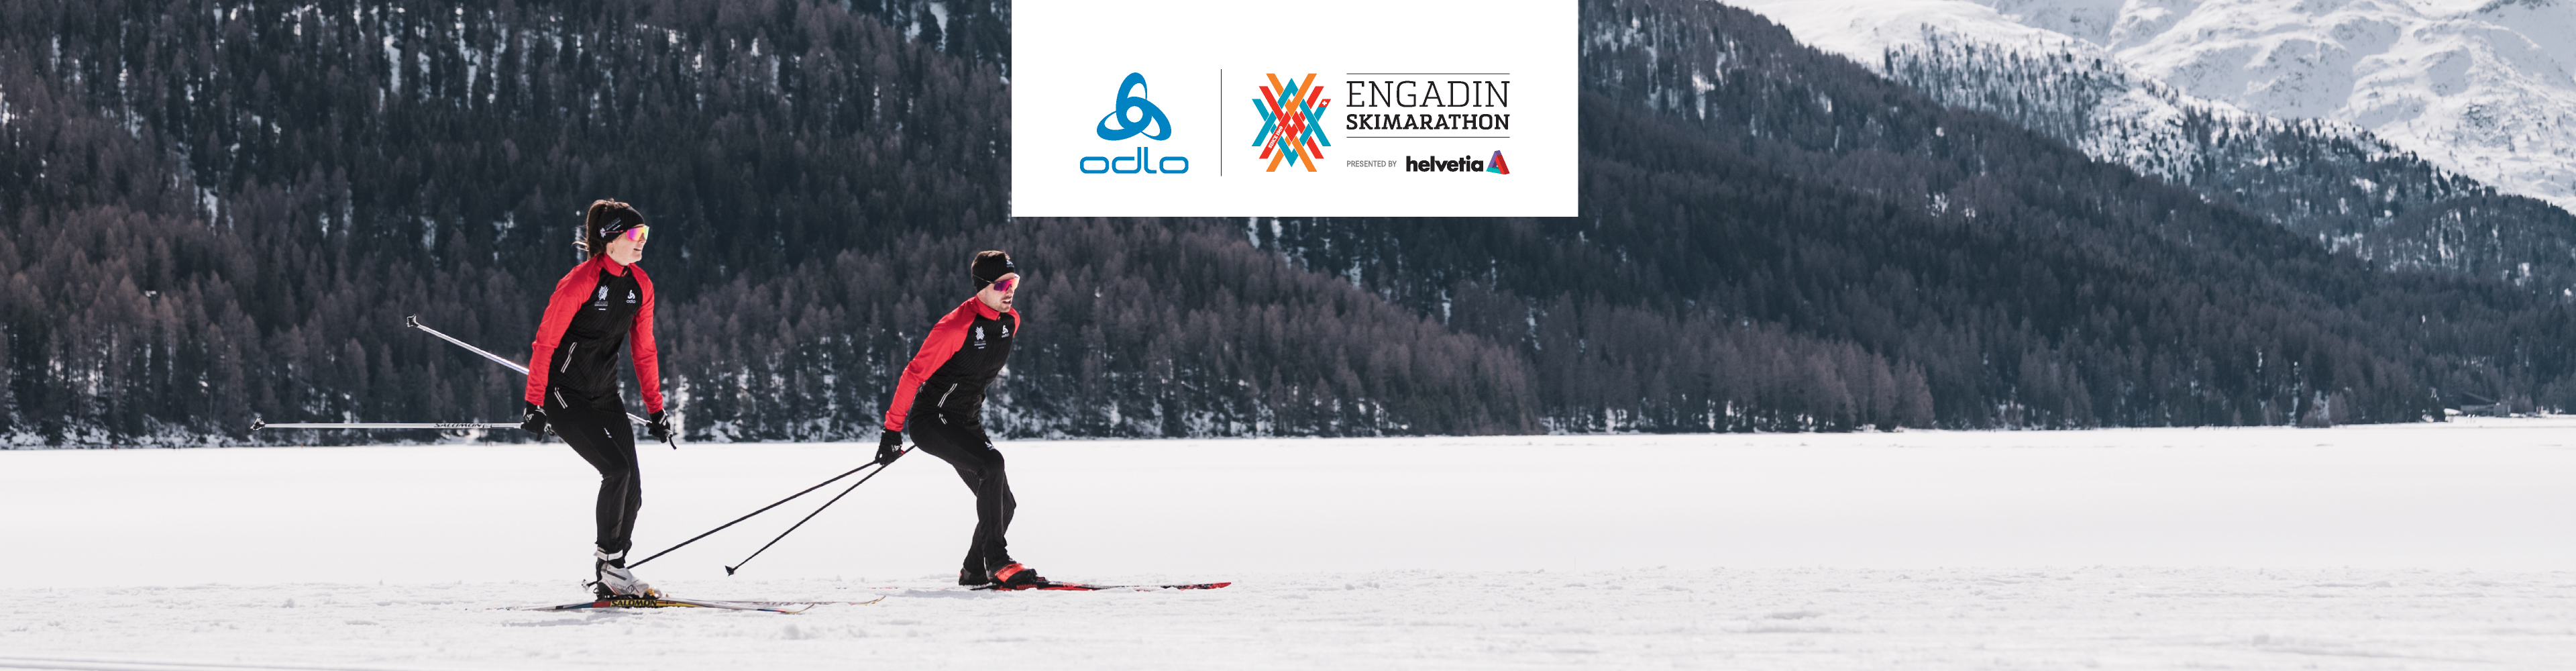 women and men cross-country skiing in the EKM Odlo outfit